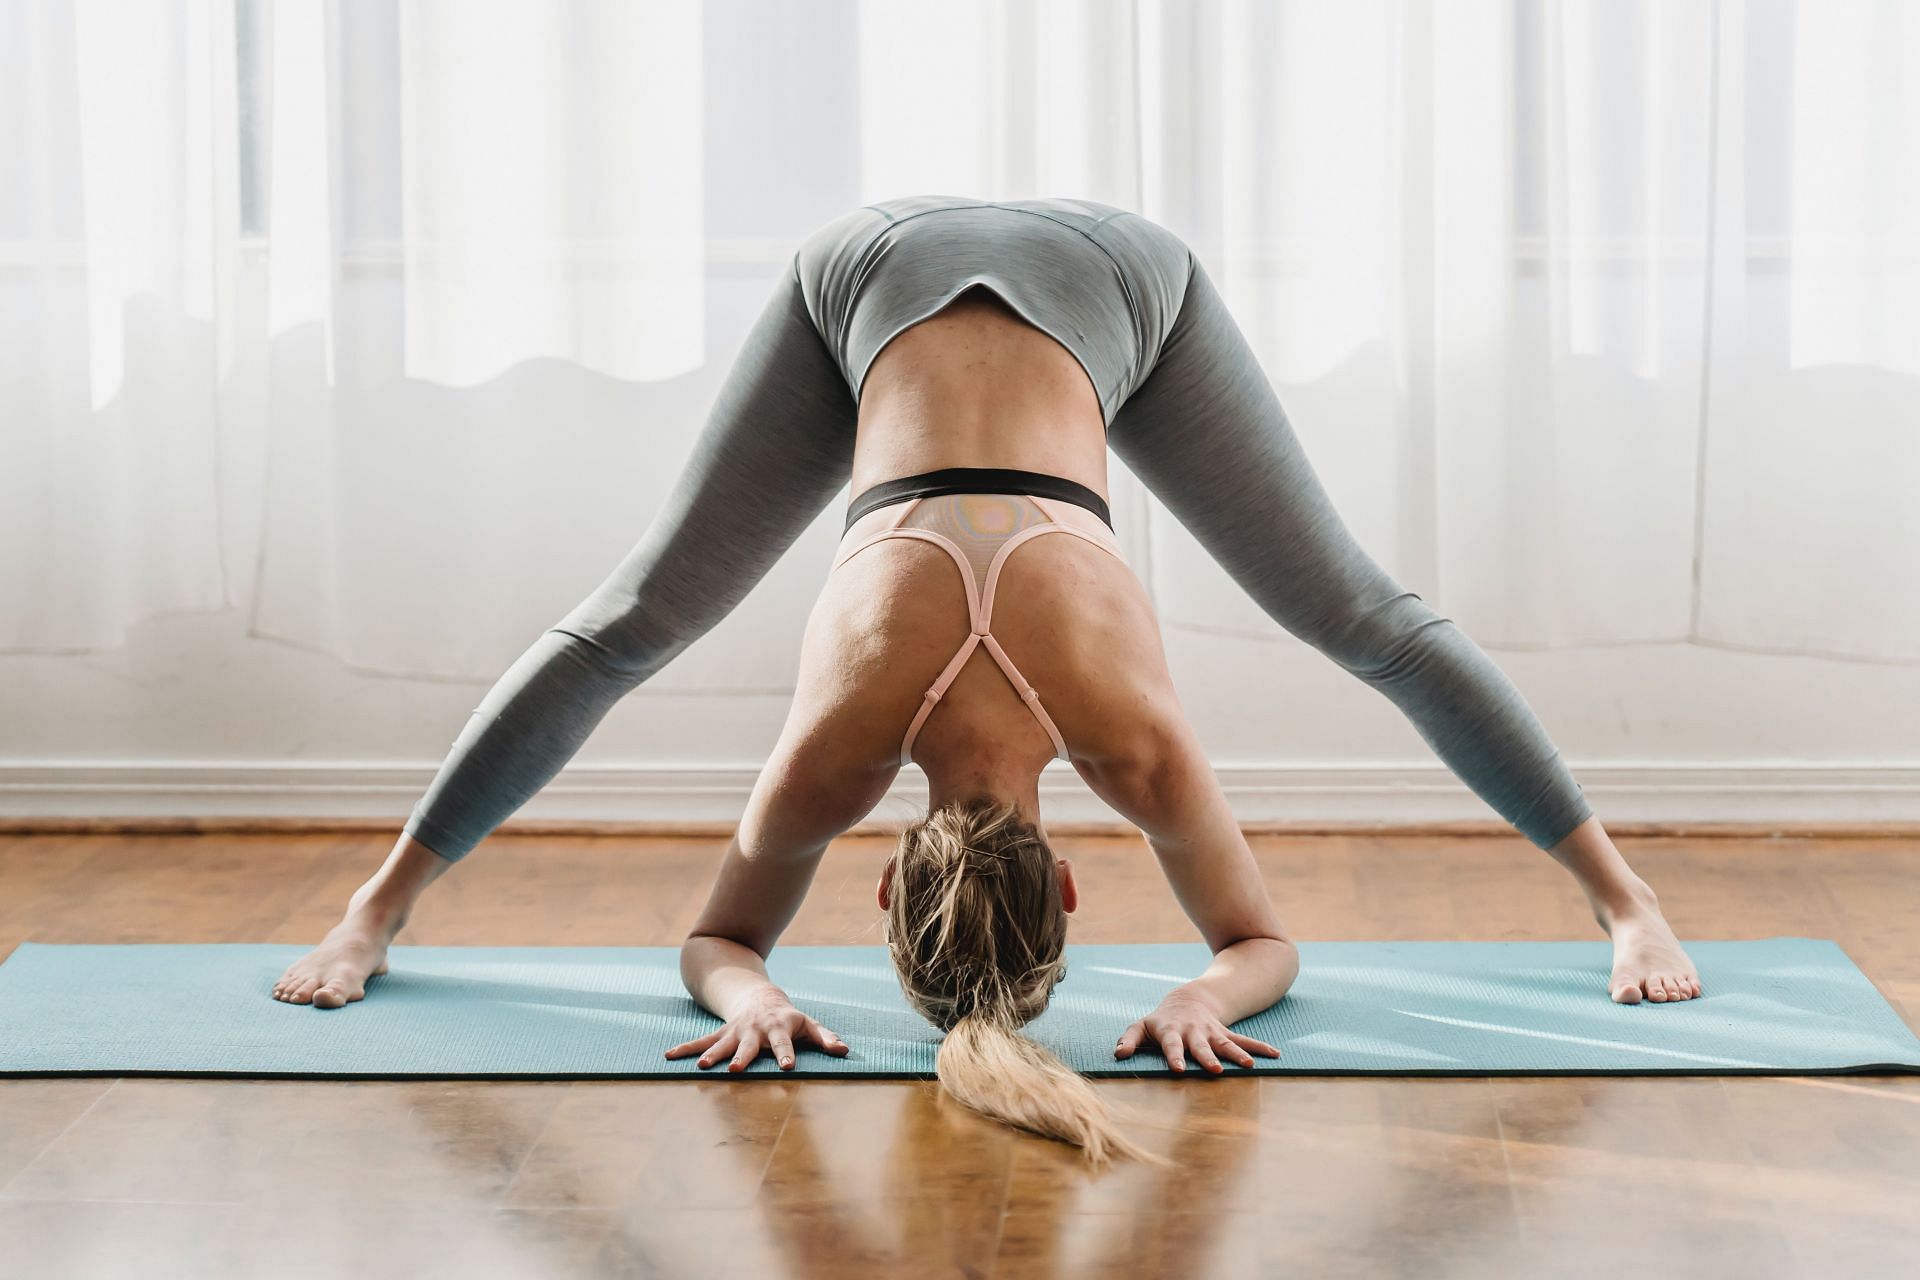 The Prasarita Padottanasana deeply stretches your legs, back and arms (Image via Pexels @Marta Wave)